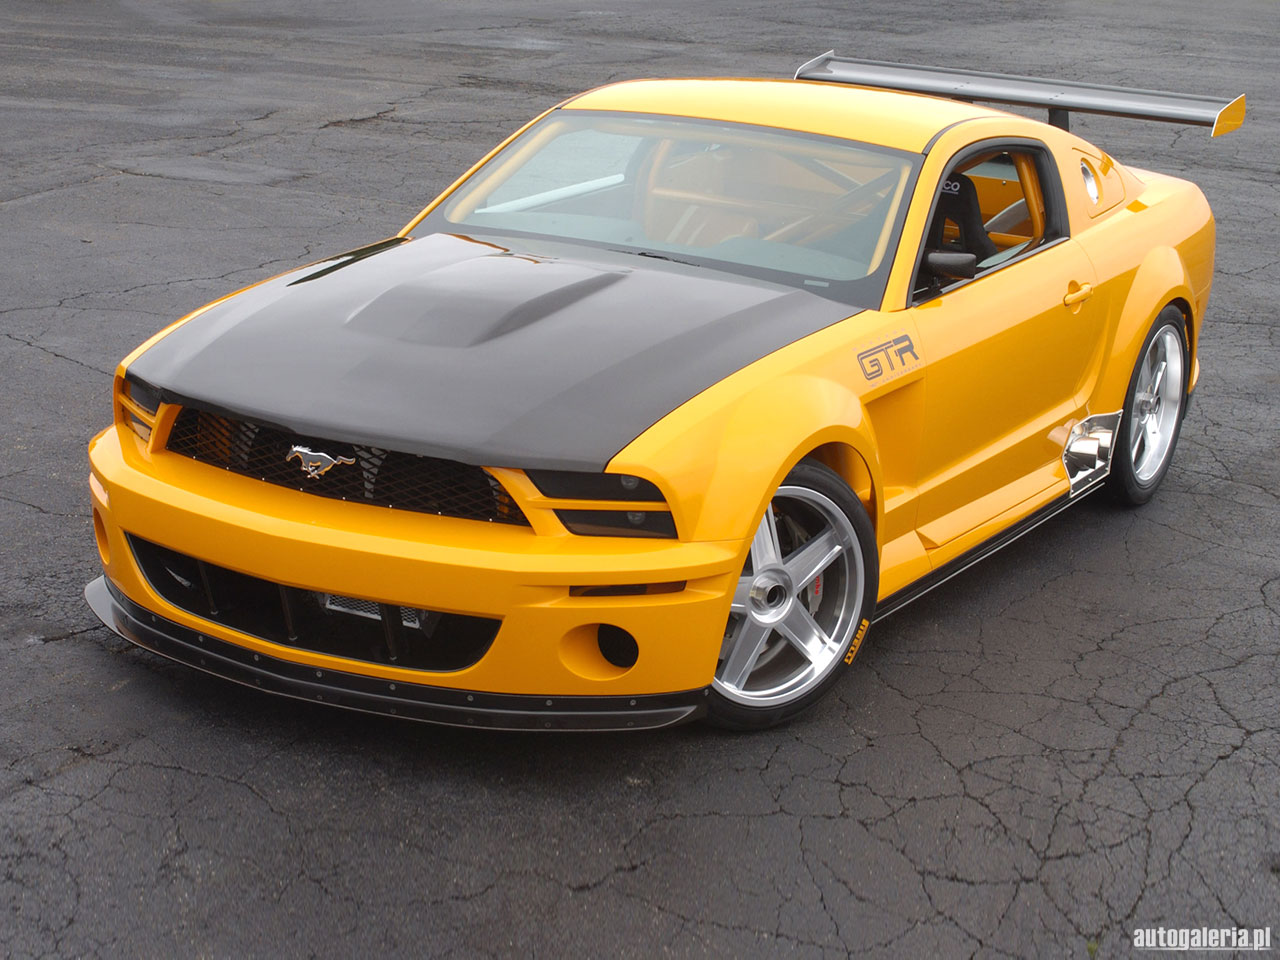 Yellow Ford Mustang GT